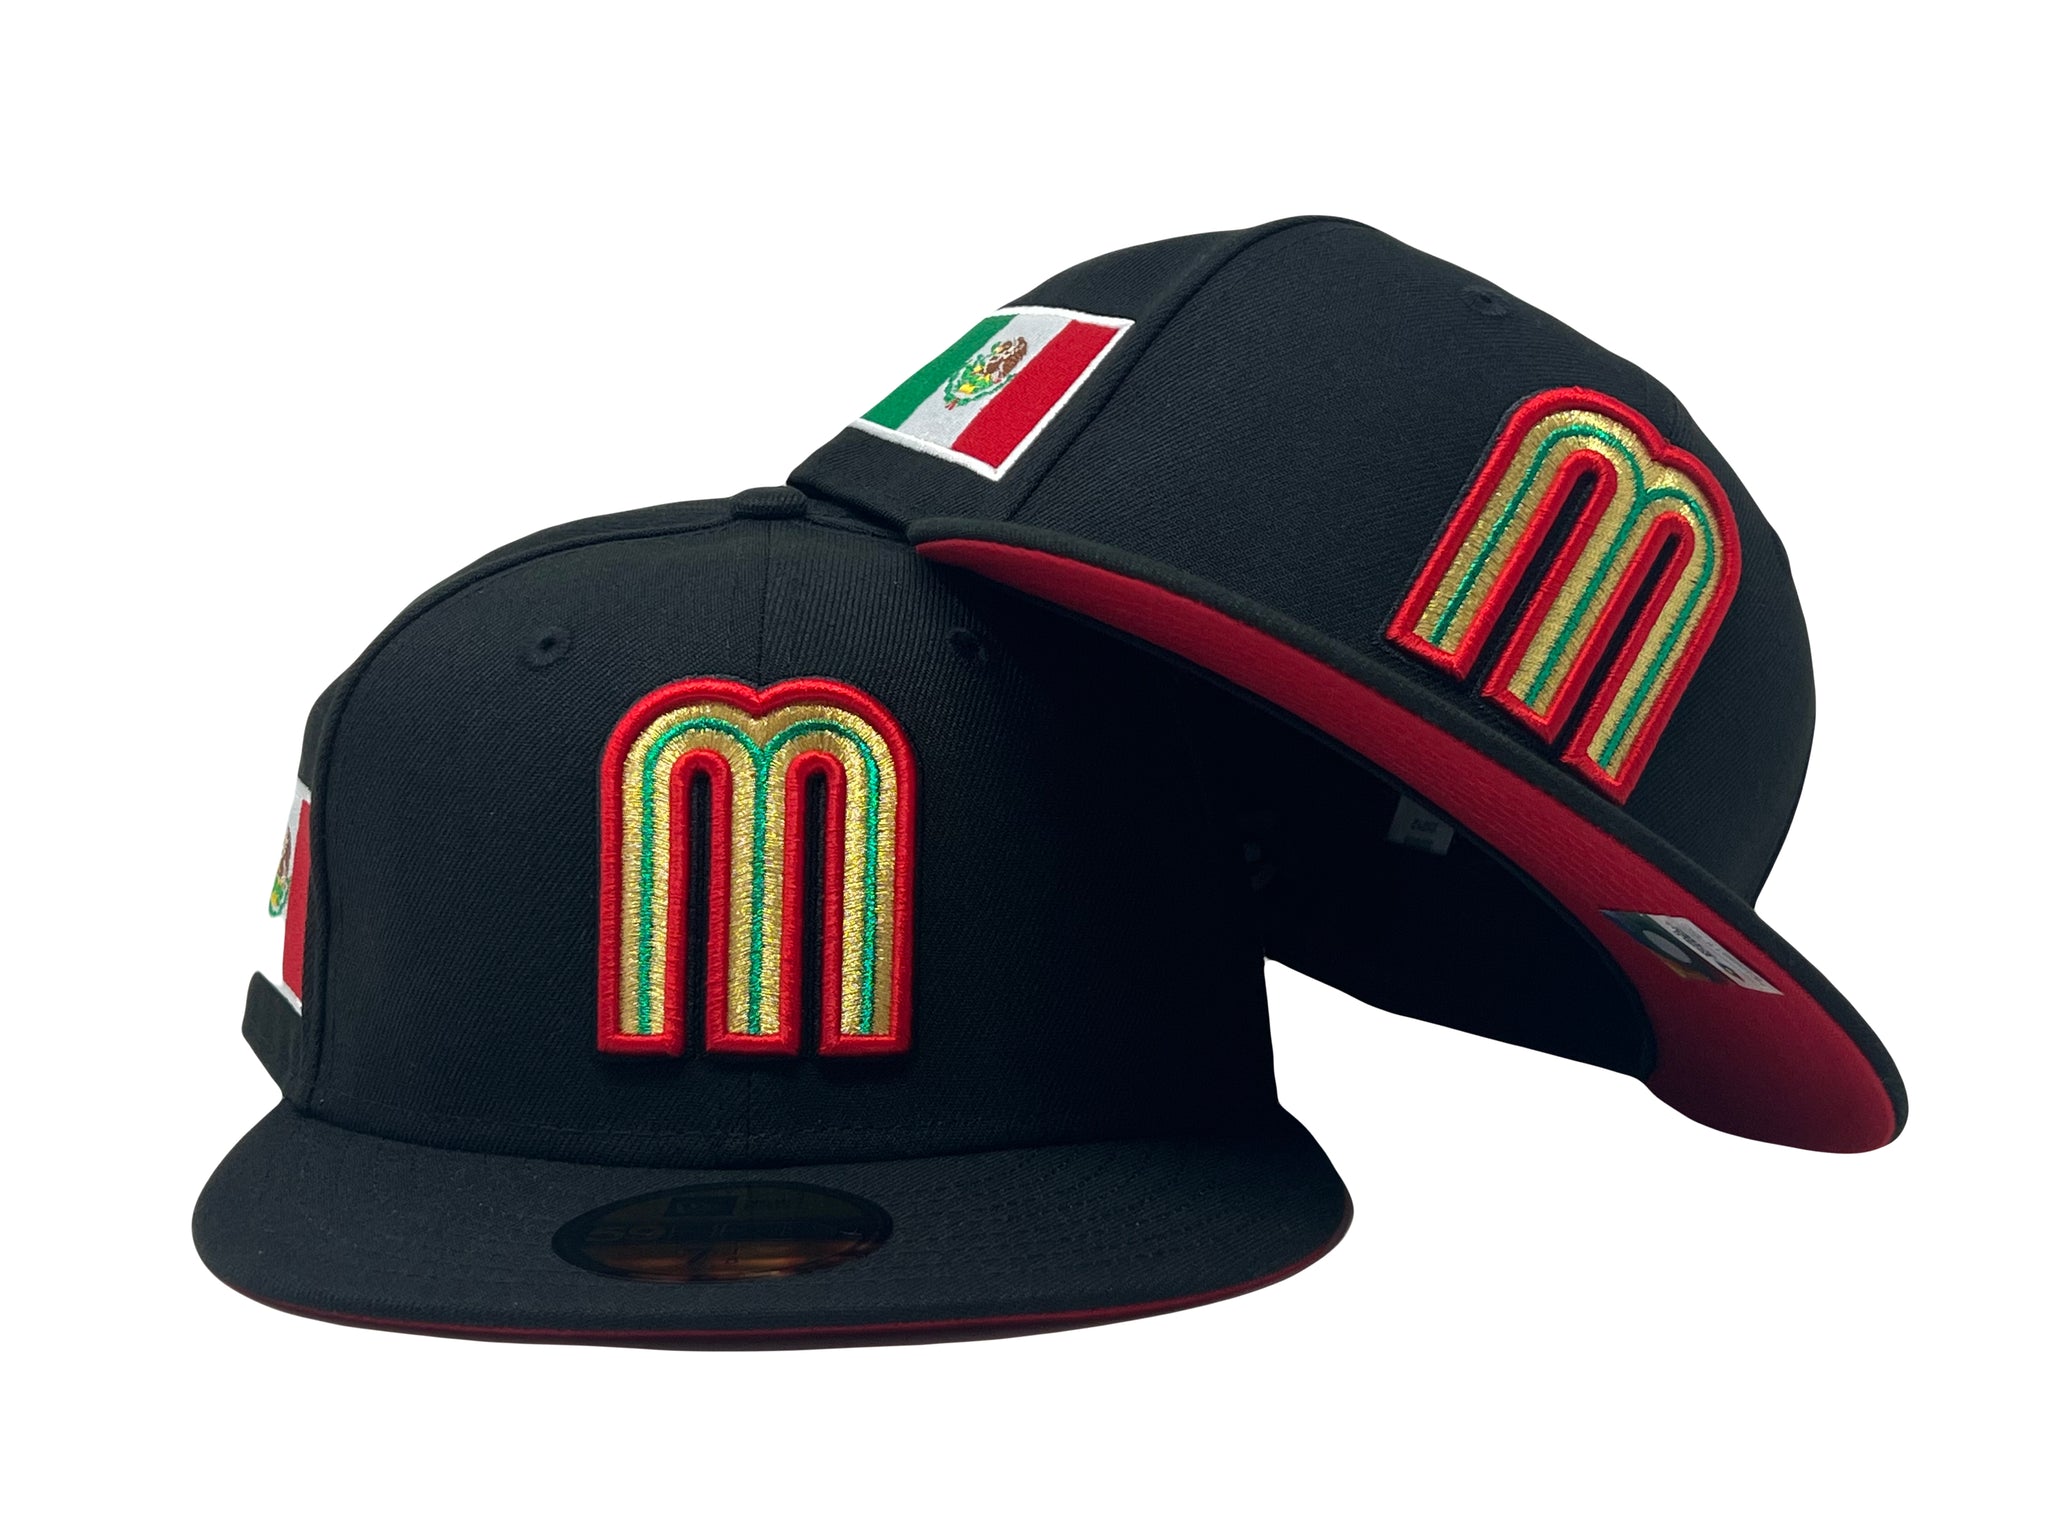 New Era 59FIFTY Mexico Baseball Fitted Hat Black